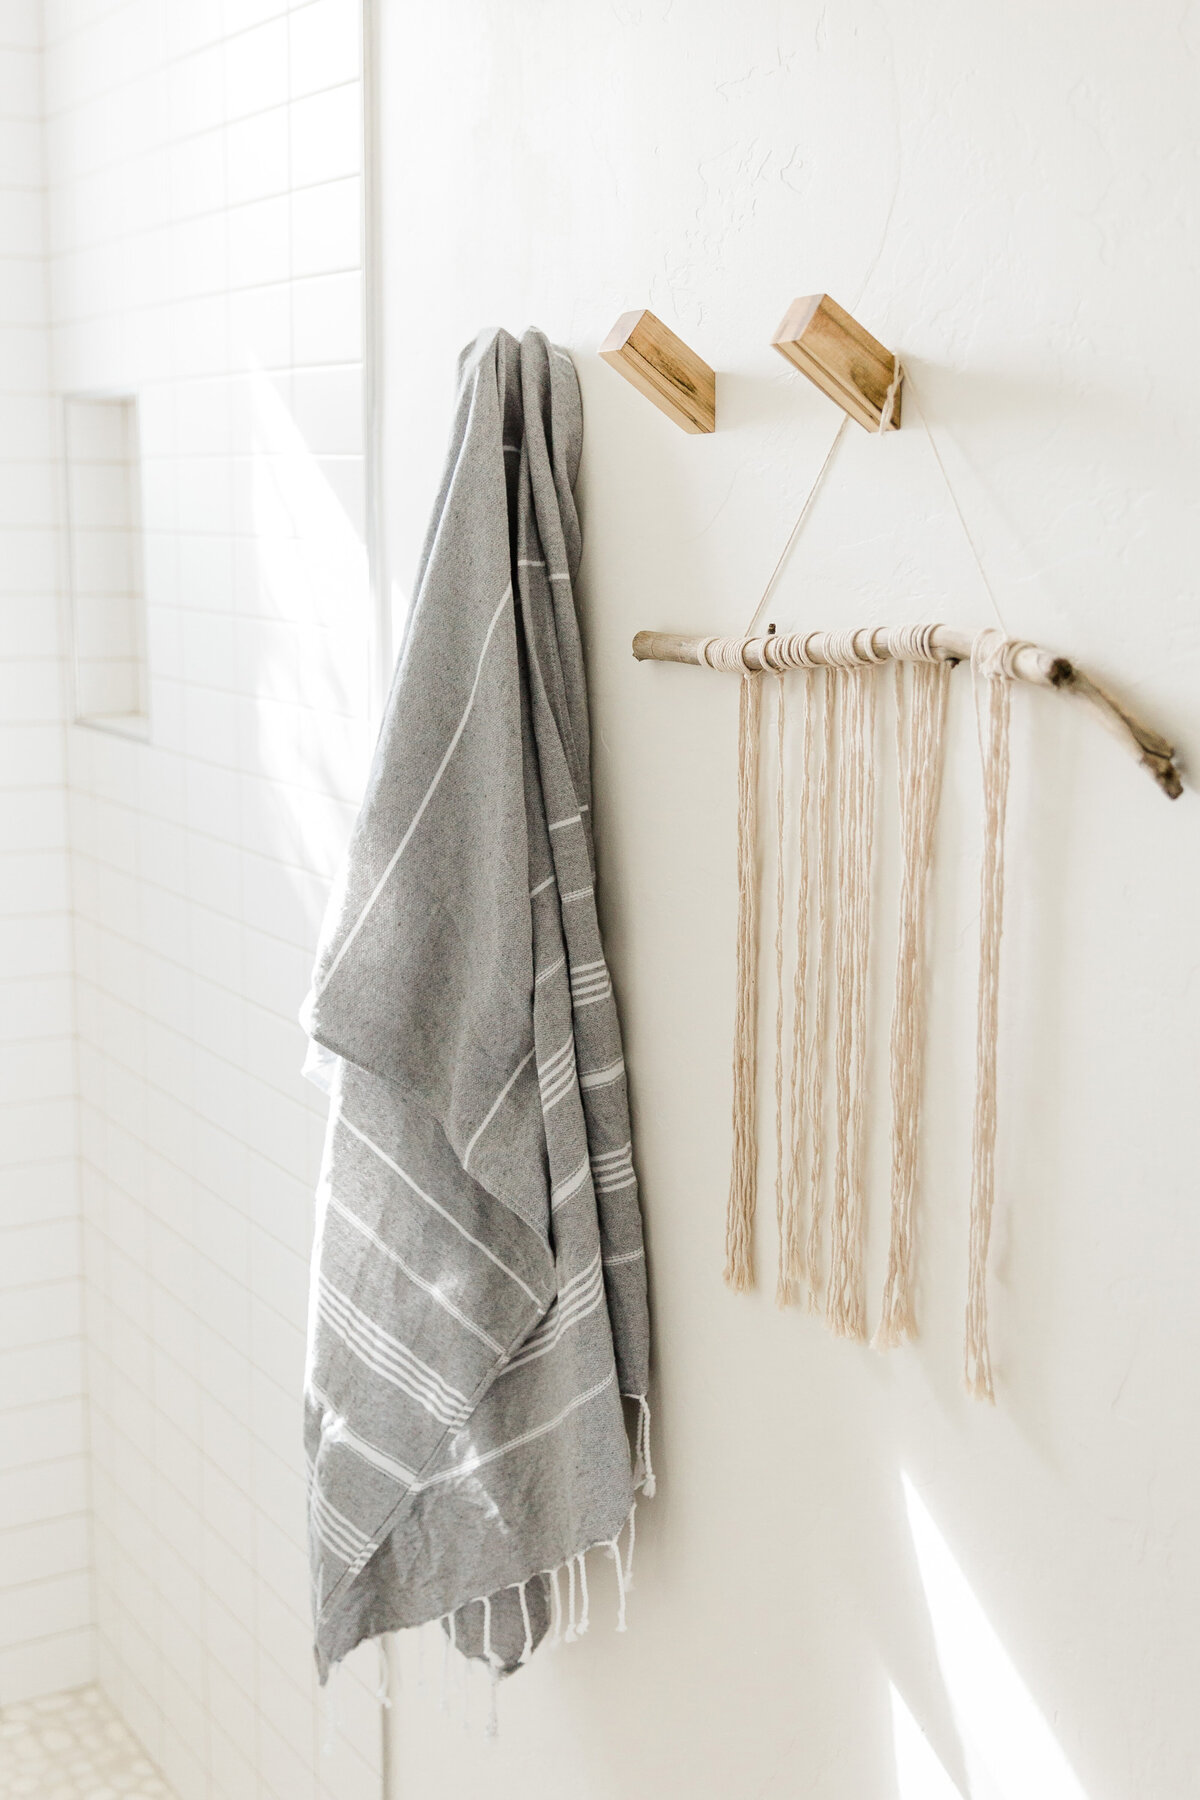 white bathroom wall with lienen towel on natural wood hooks